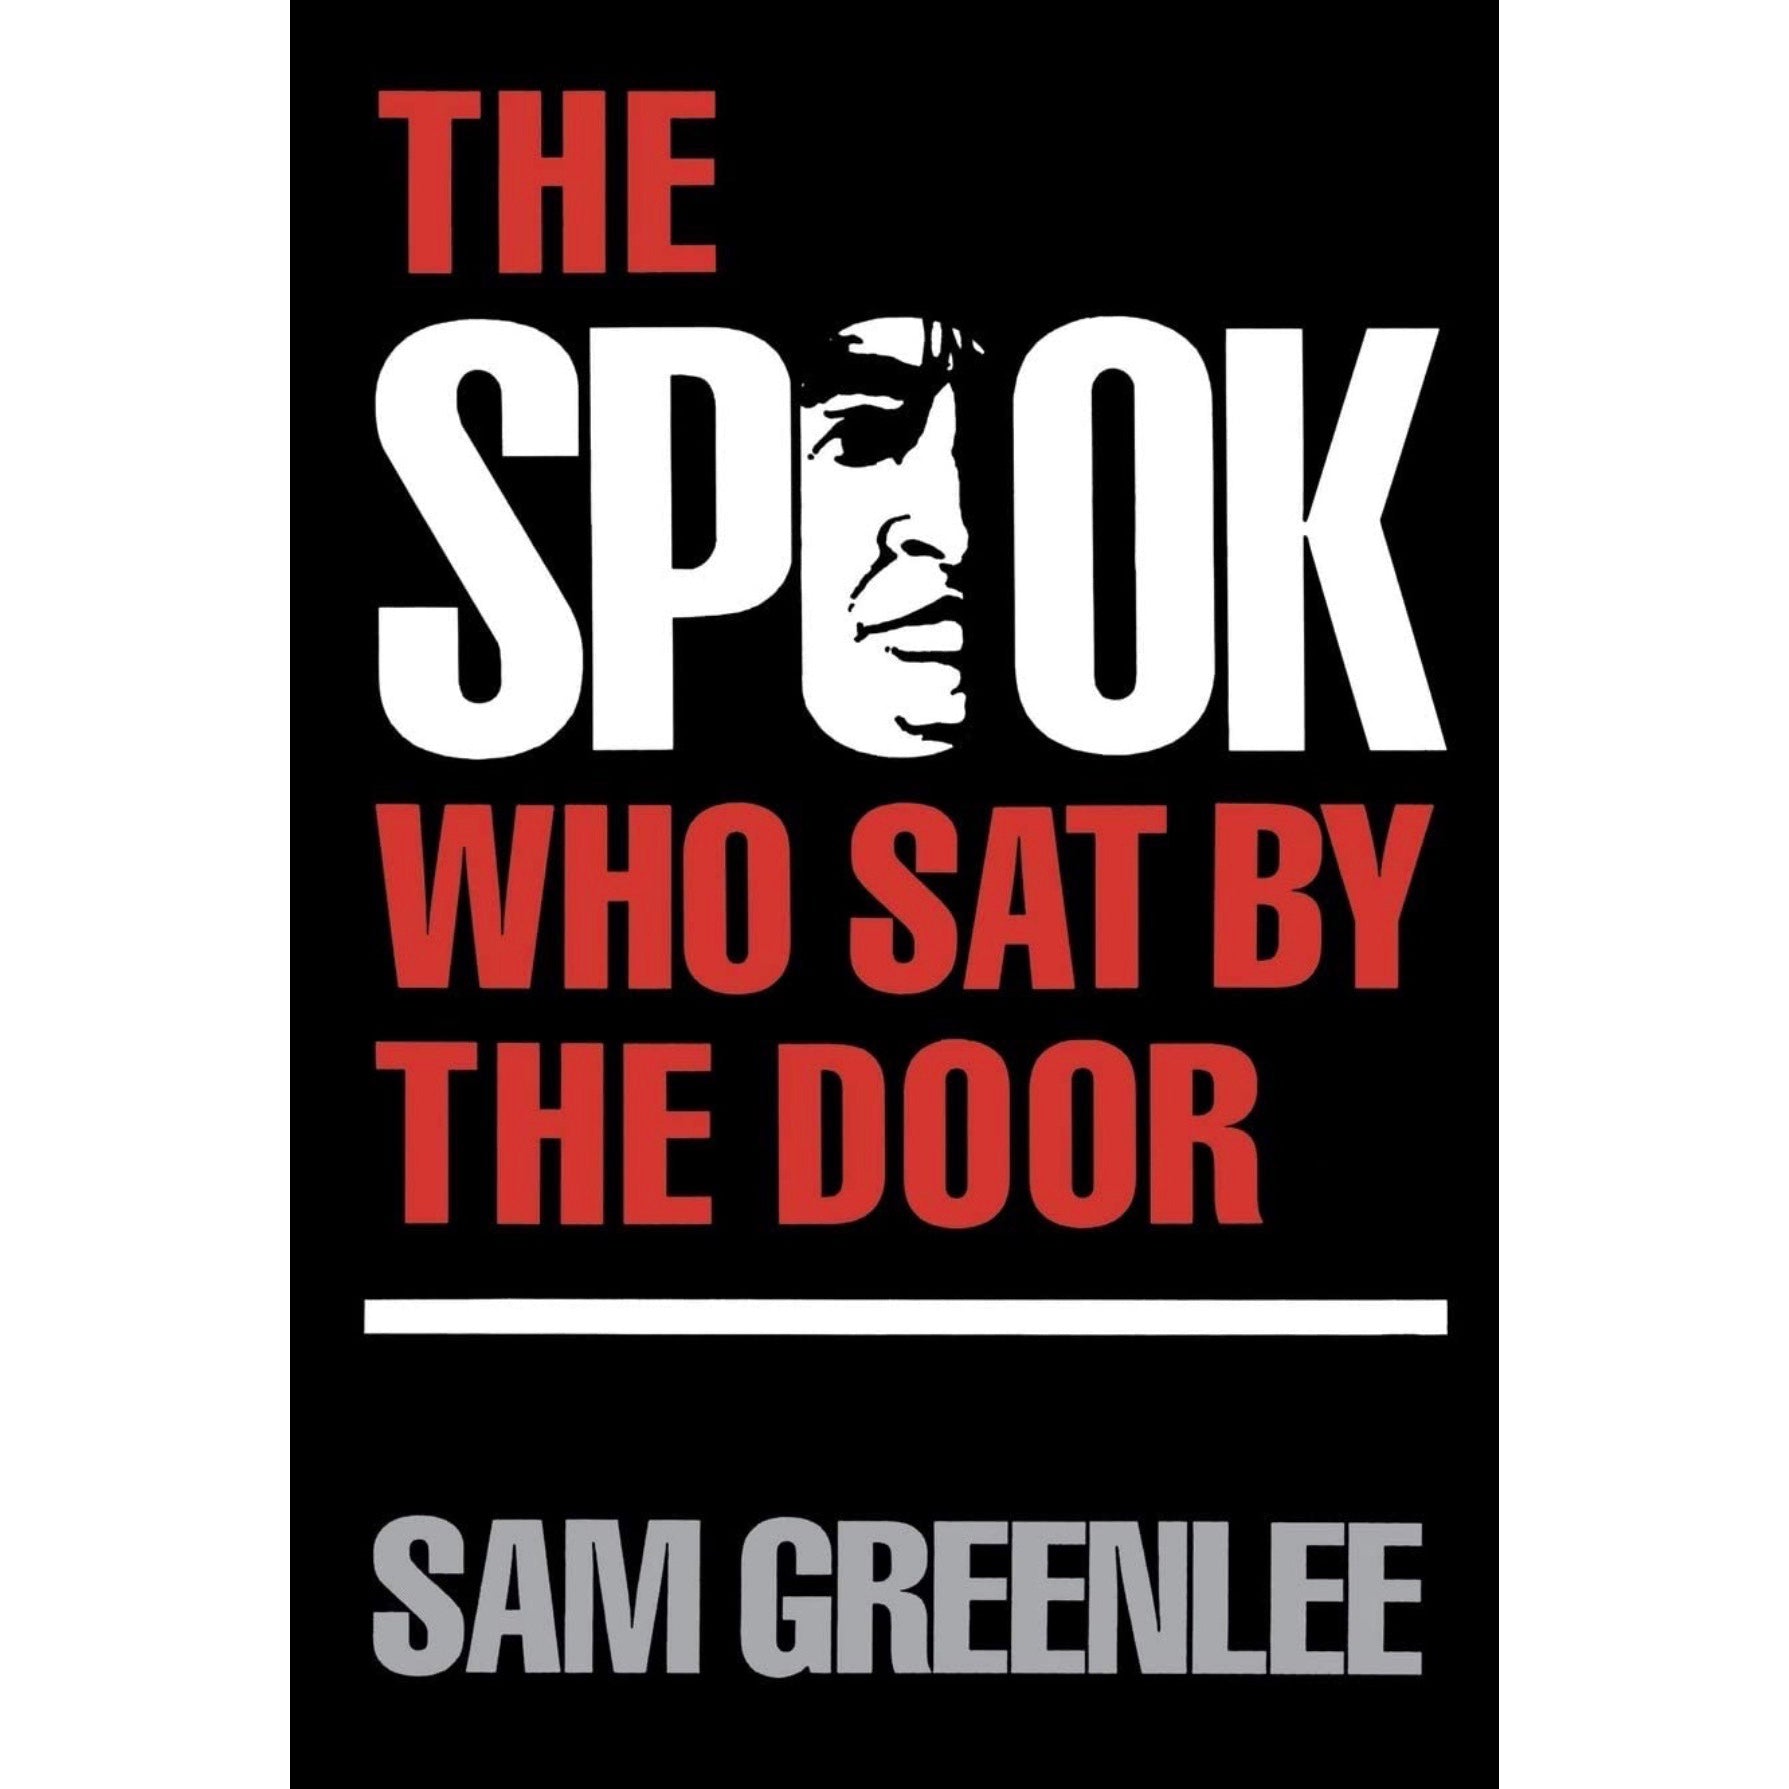 The Spook Who Sat by the Door (1989 Edition Paperback)